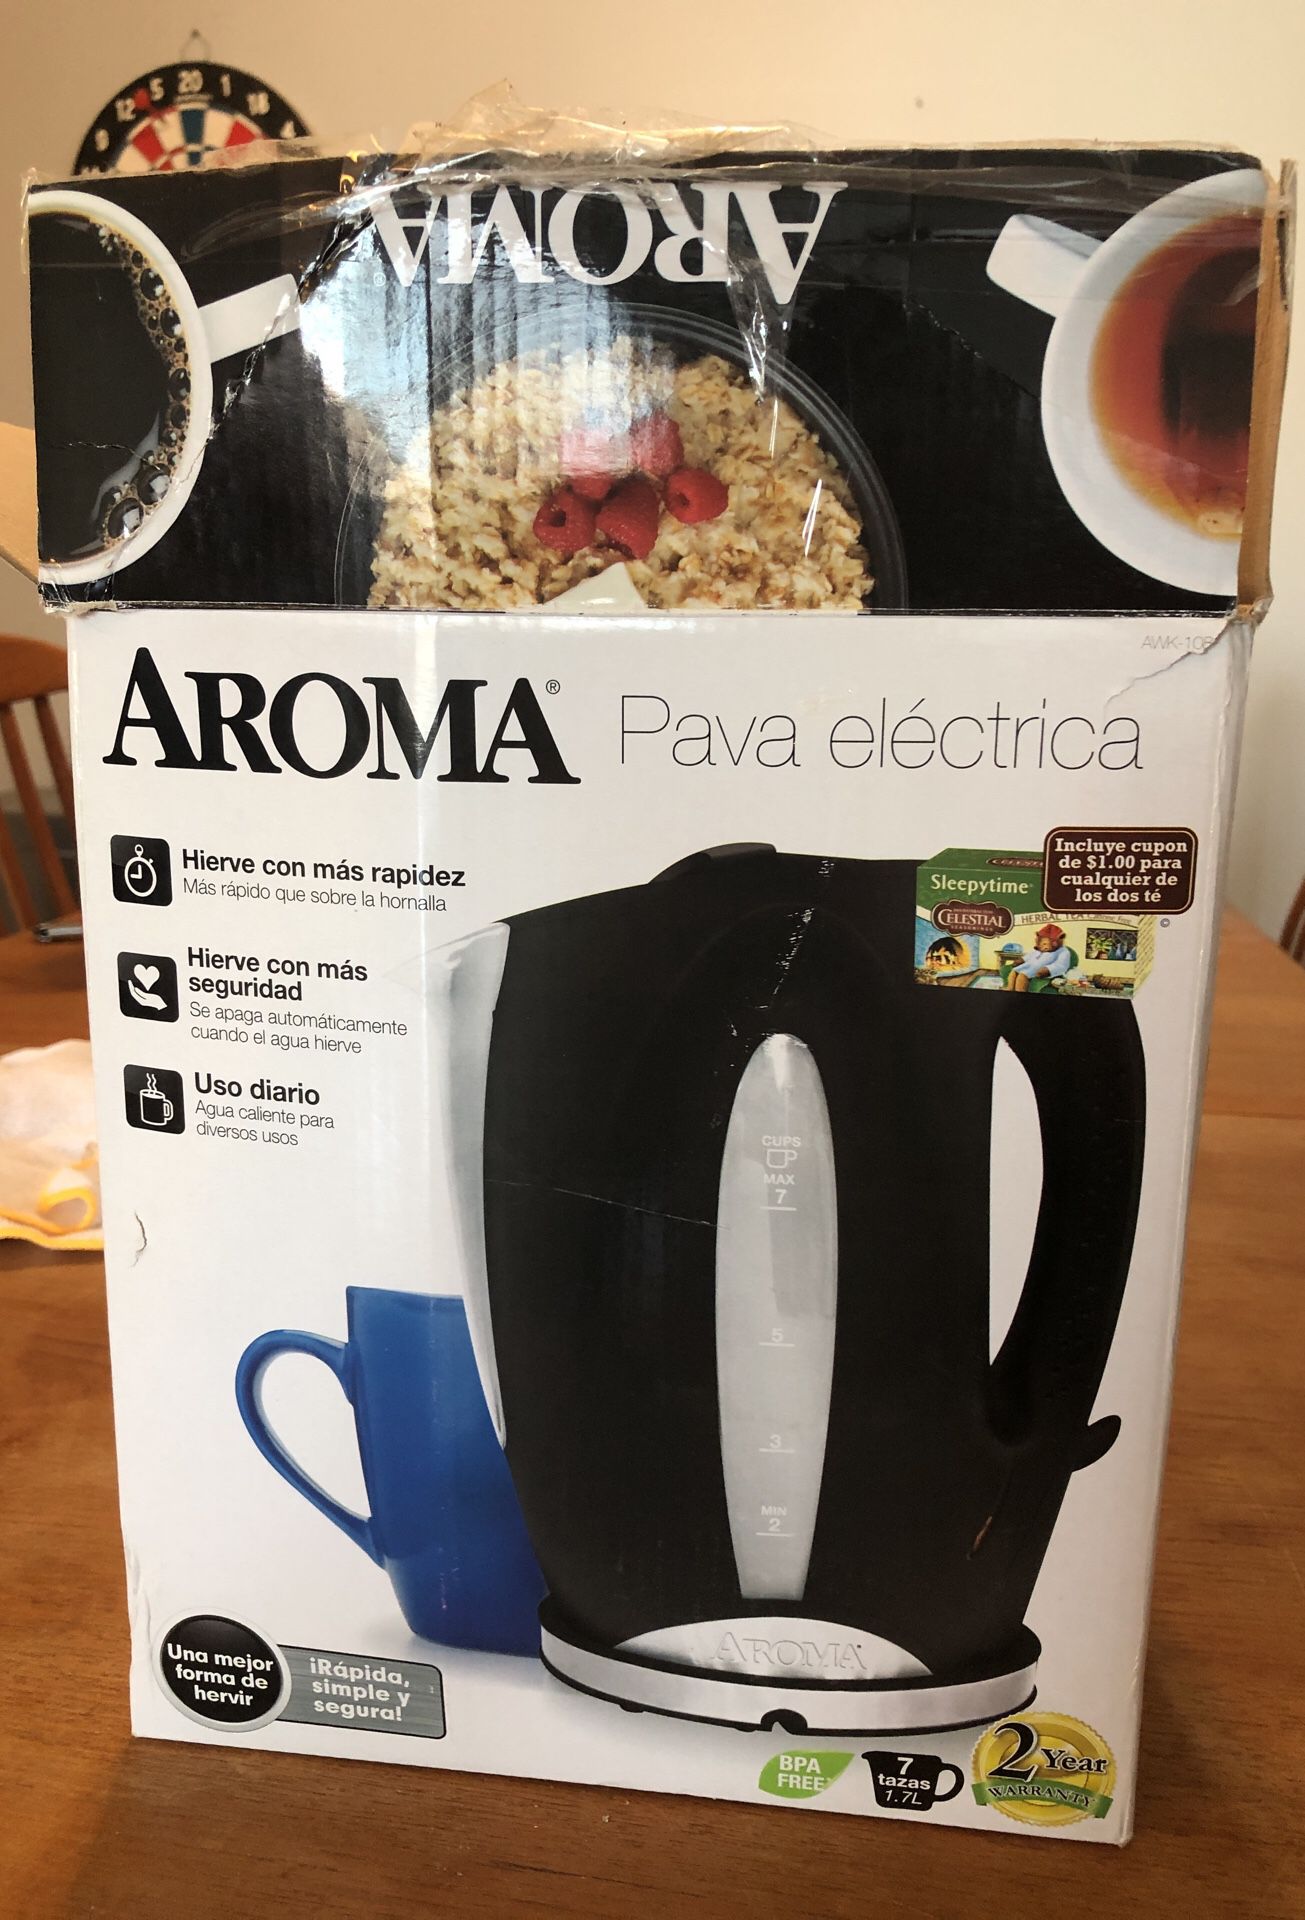 Aroma electric kettle